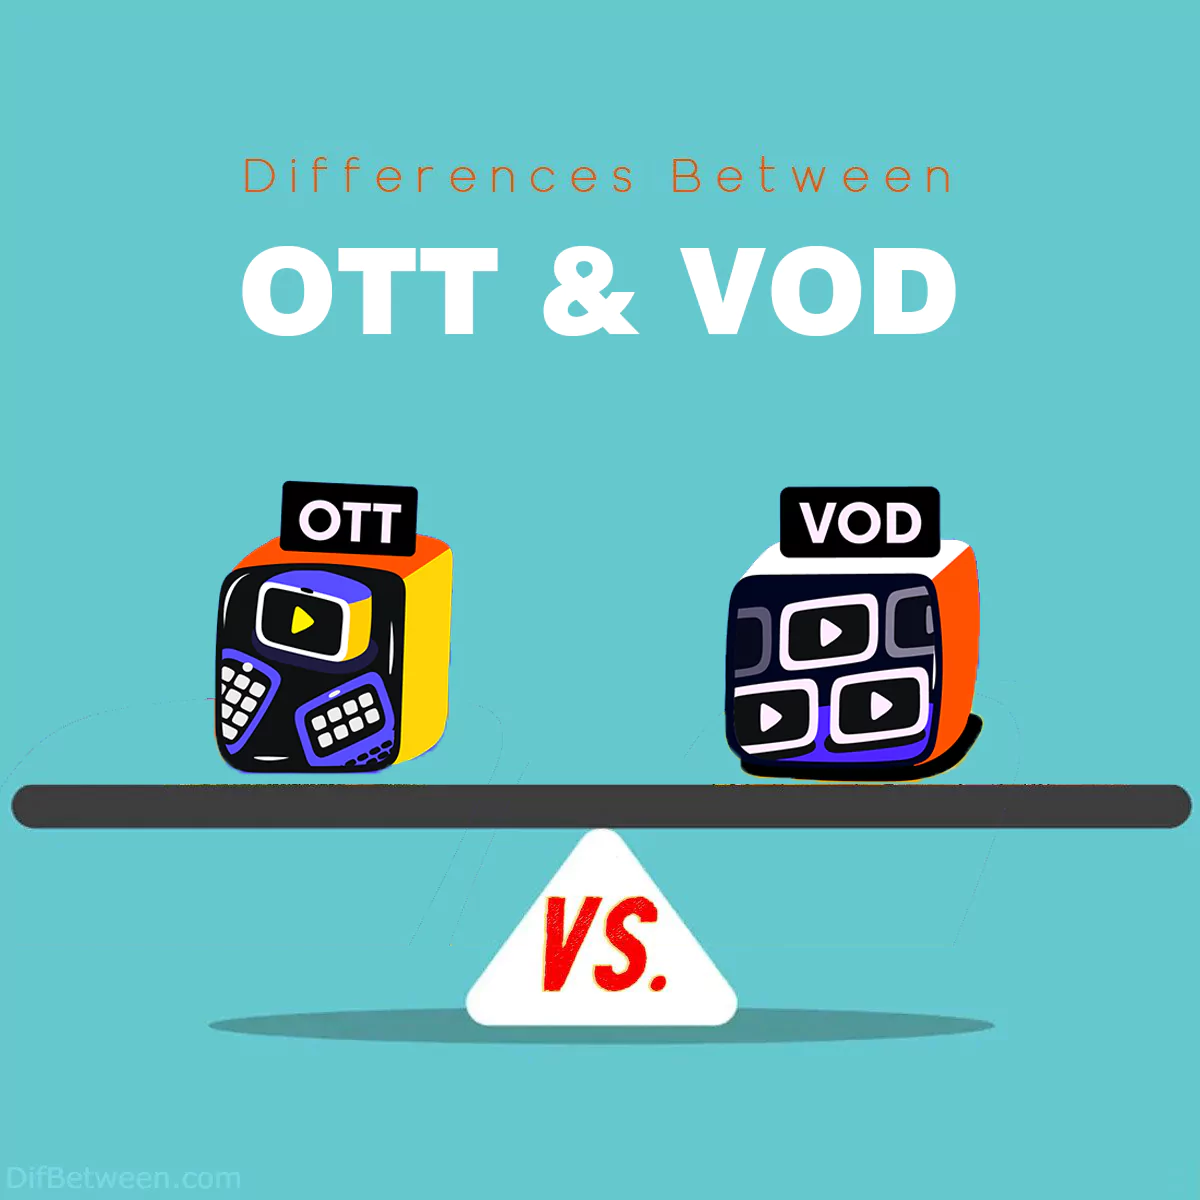 Differences Between OTT and VOD